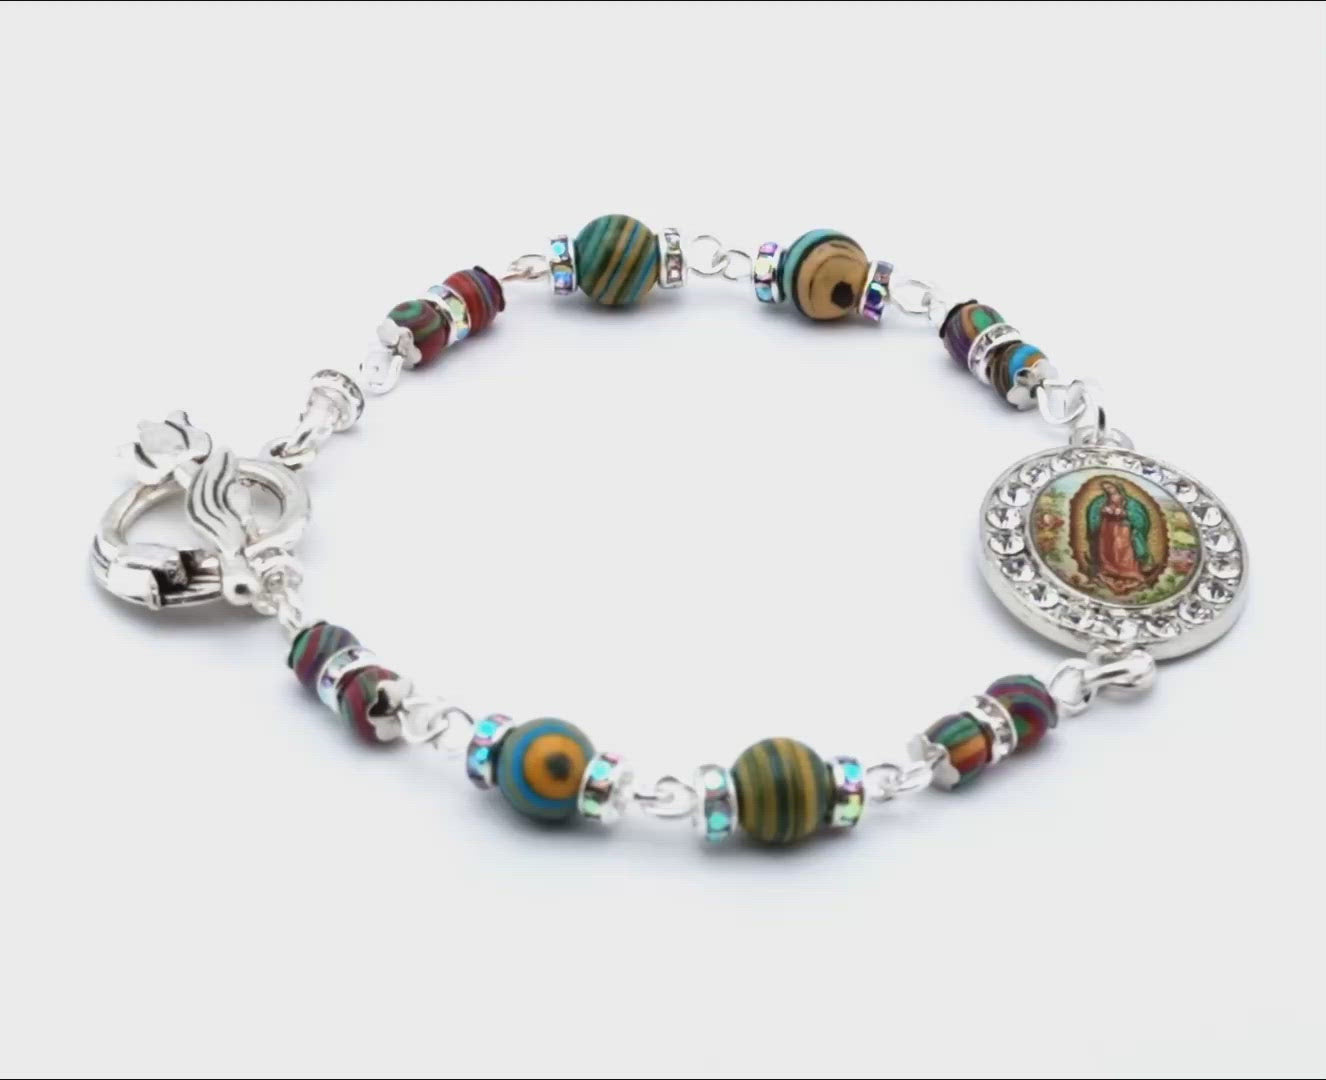 Our Lady of Guadalupe unique rosary beads with multicoloured gemstone beads, silver clasp and picture medal.